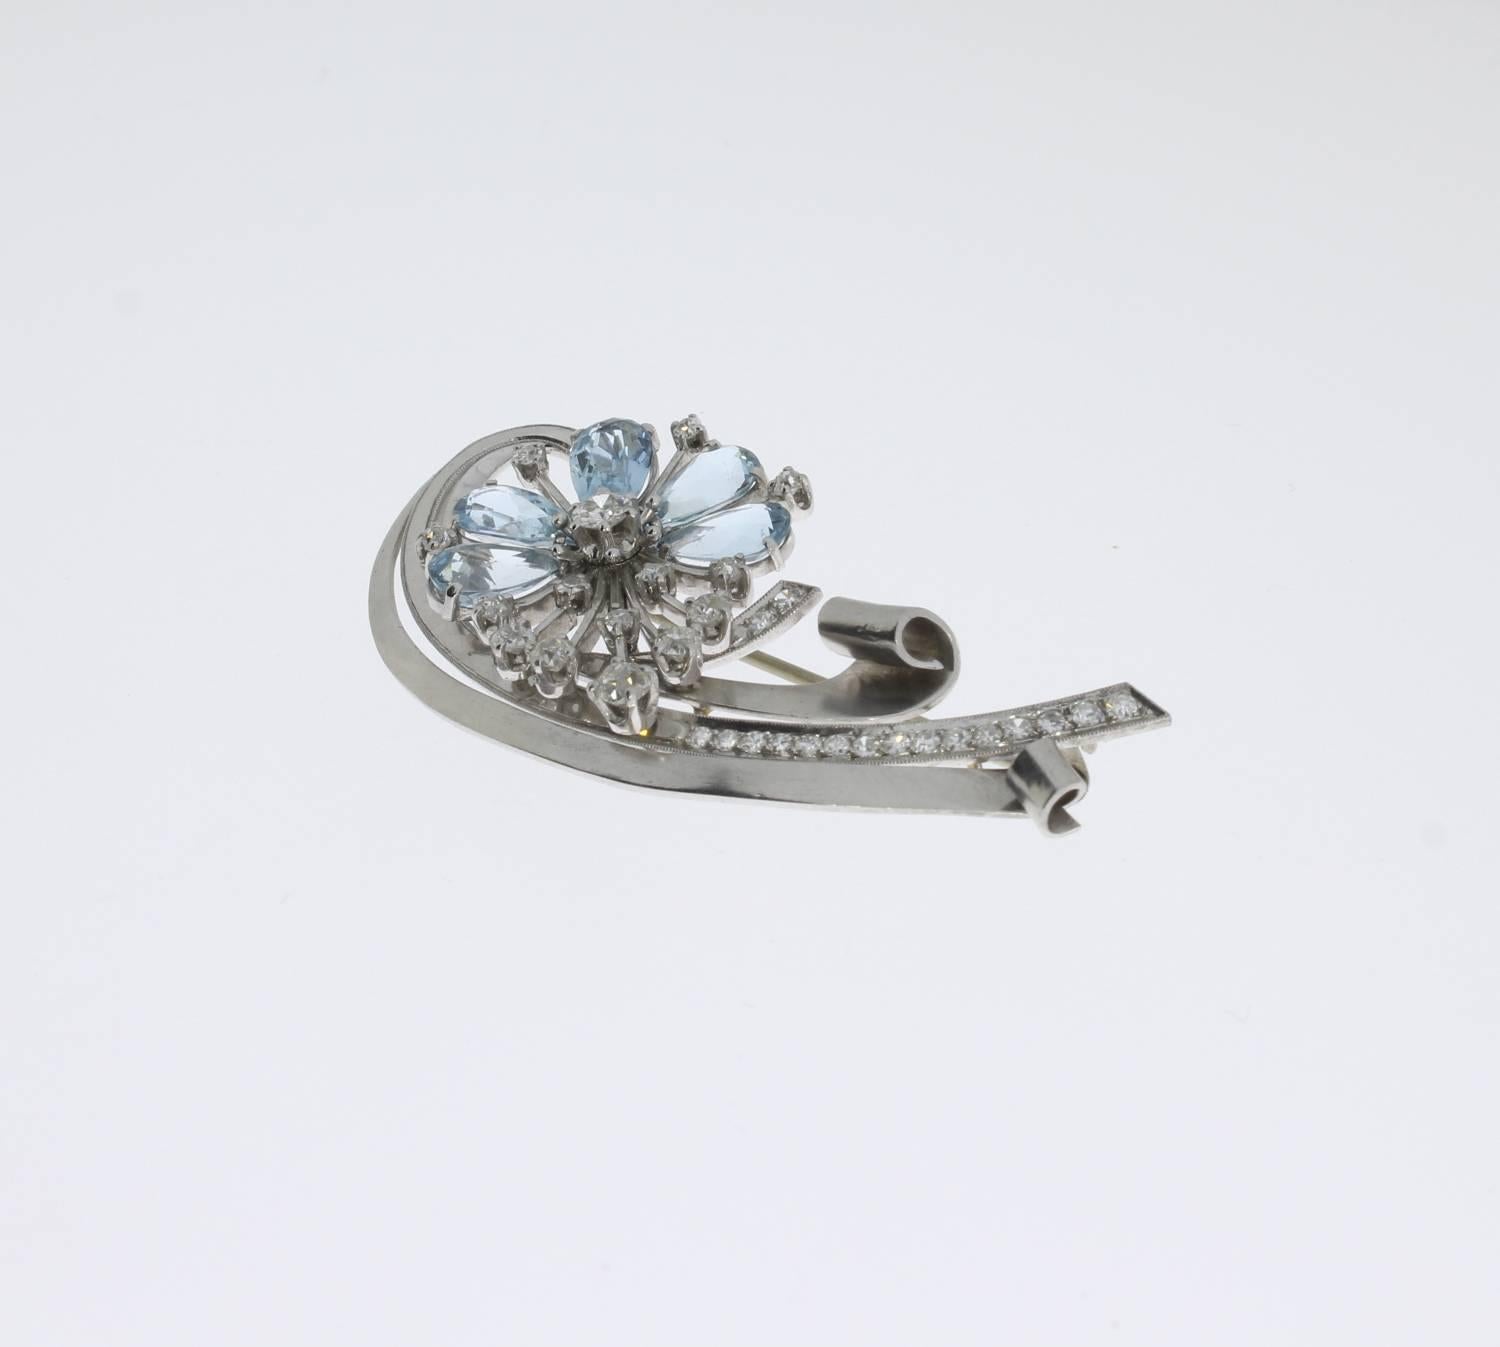 Charming floral design, USA 1930's-1940's. With 5 tear-drops Aquamarine in prong setting weighing circa 7,5t and 33 brilliant-, chaton-, and old-mine cut diamonds weighing ca. 0,82ct. Mounted in platinum. Total weight: 19,60 g.
Measurements: 2.36 x